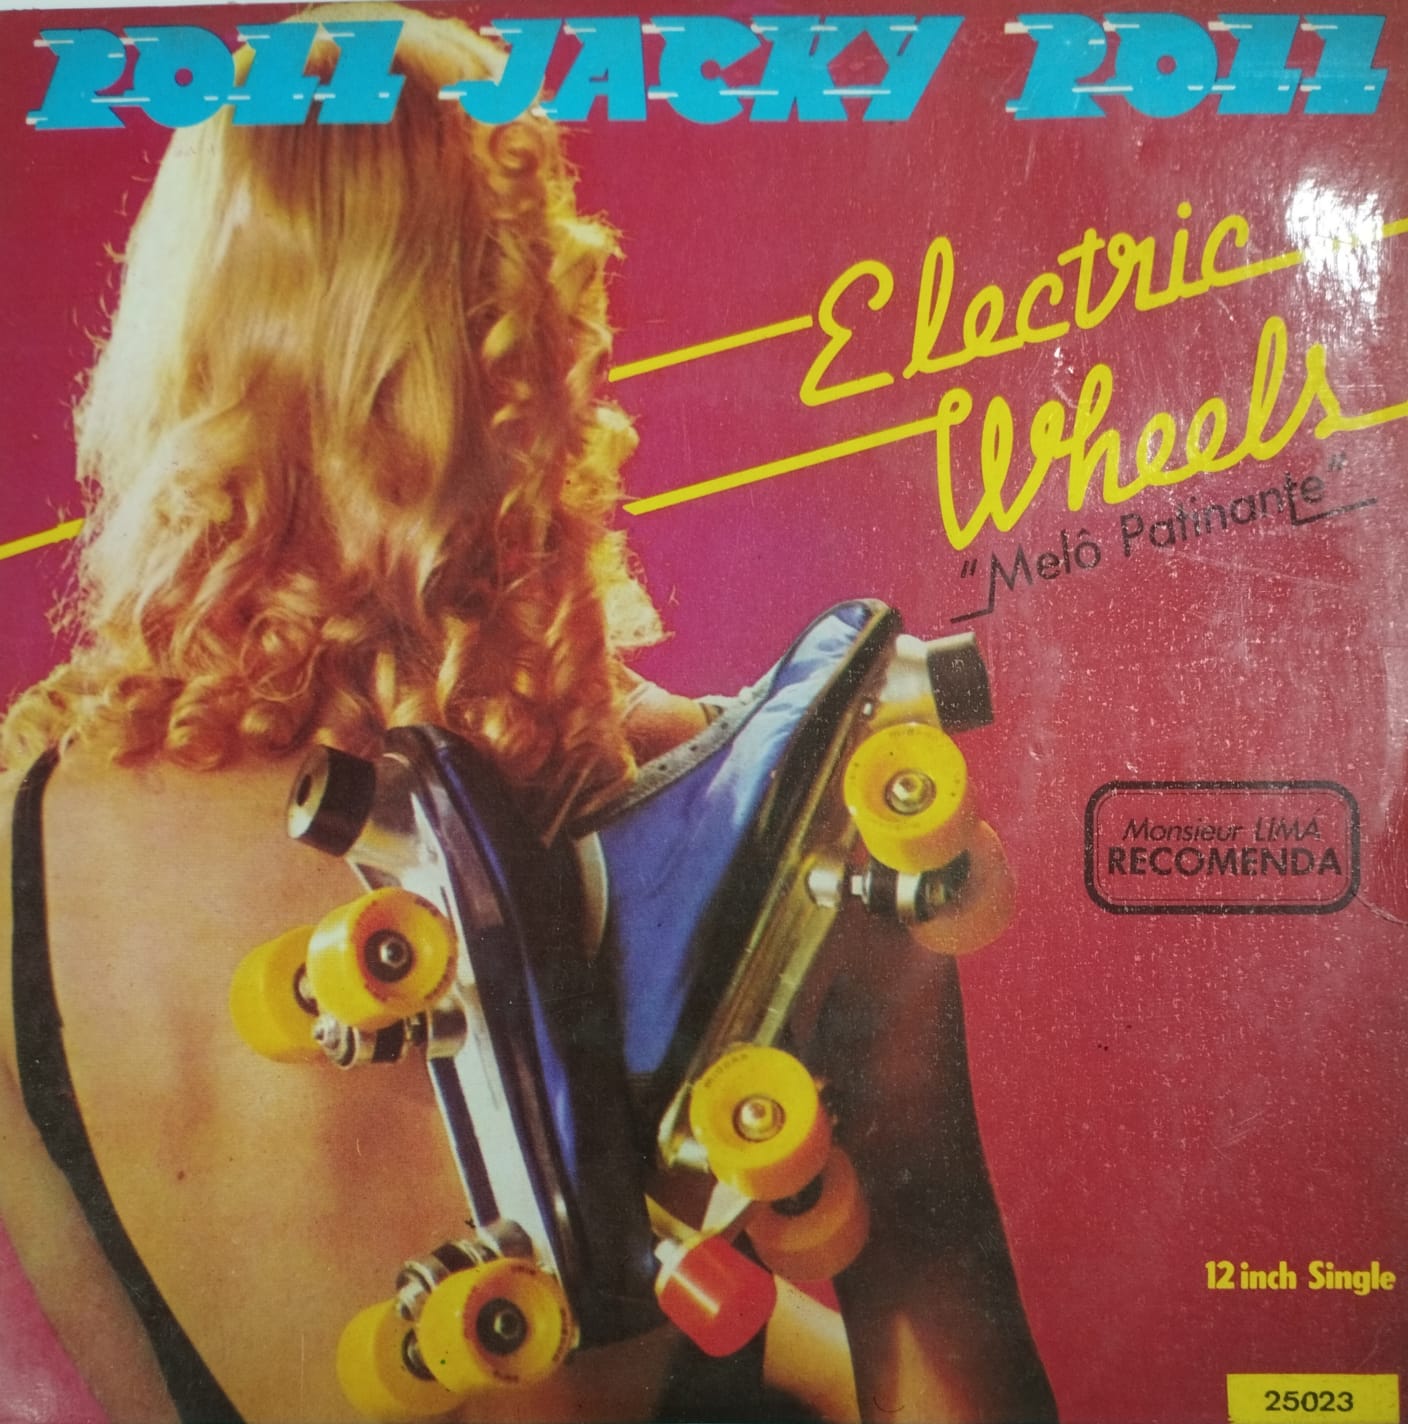 Electric Wheels - Roll Jacky Roll (Melô Patinante) (Compacto)